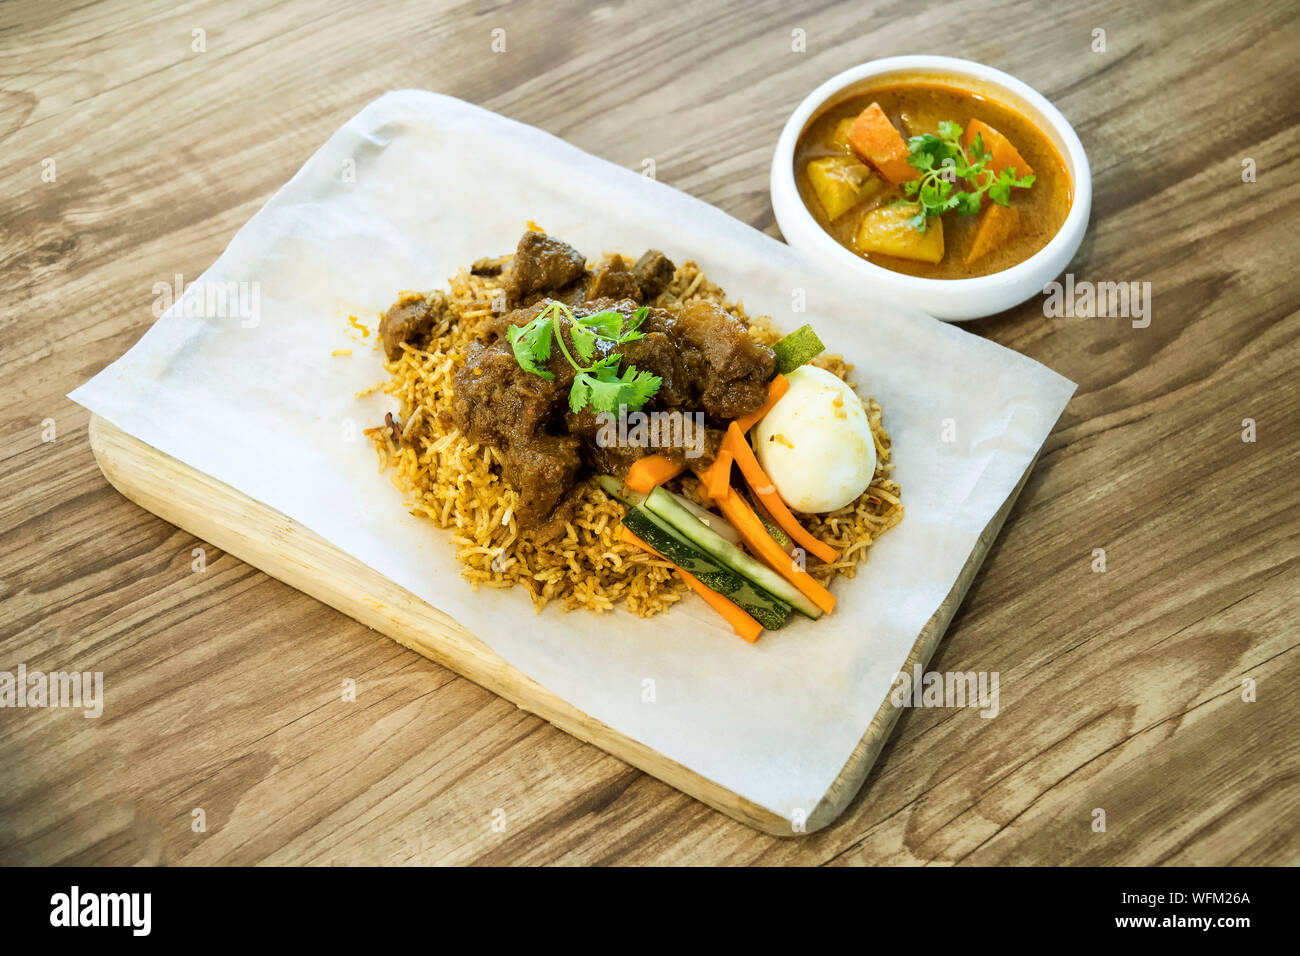 High Angle View Of Nasi Biryani With Rendang Served On Wooden Table Stock Photo